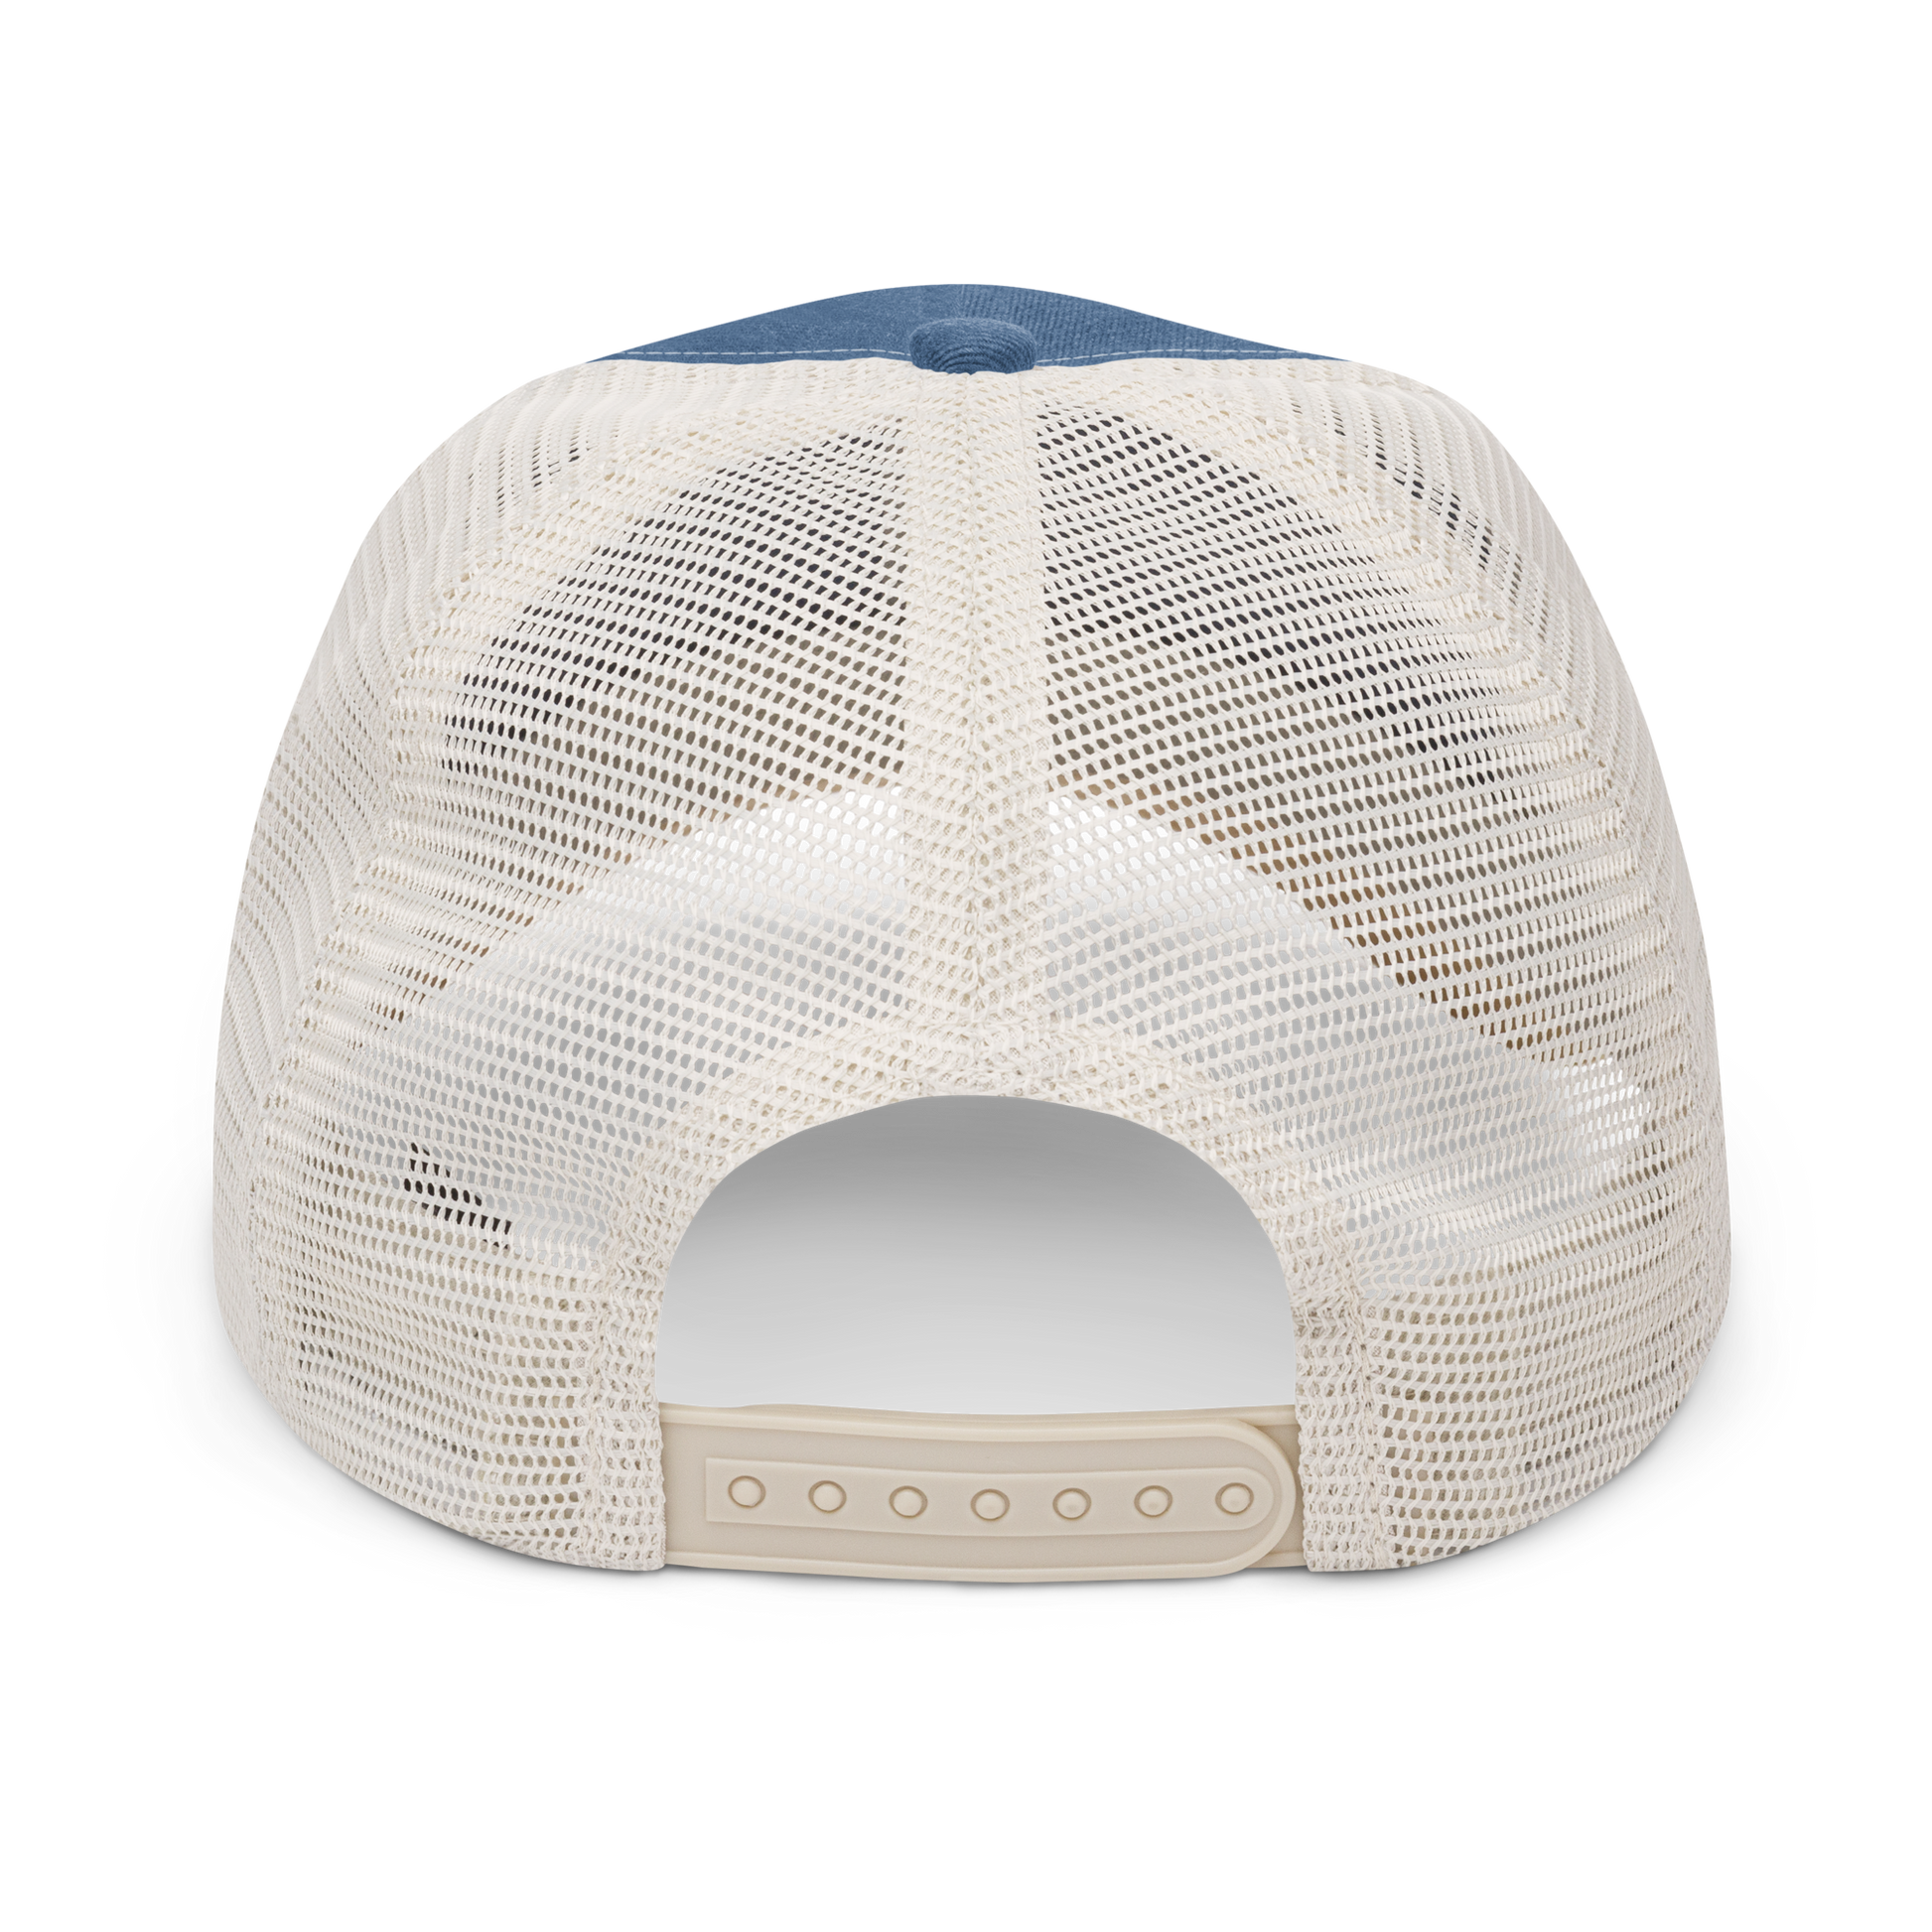 YHM Designs - YXE Saskatoon Pigment-Dyed Trucker Cap - Crossed-X Design with Airport Code and Vintage Propliner - White Embroidery - Image 19